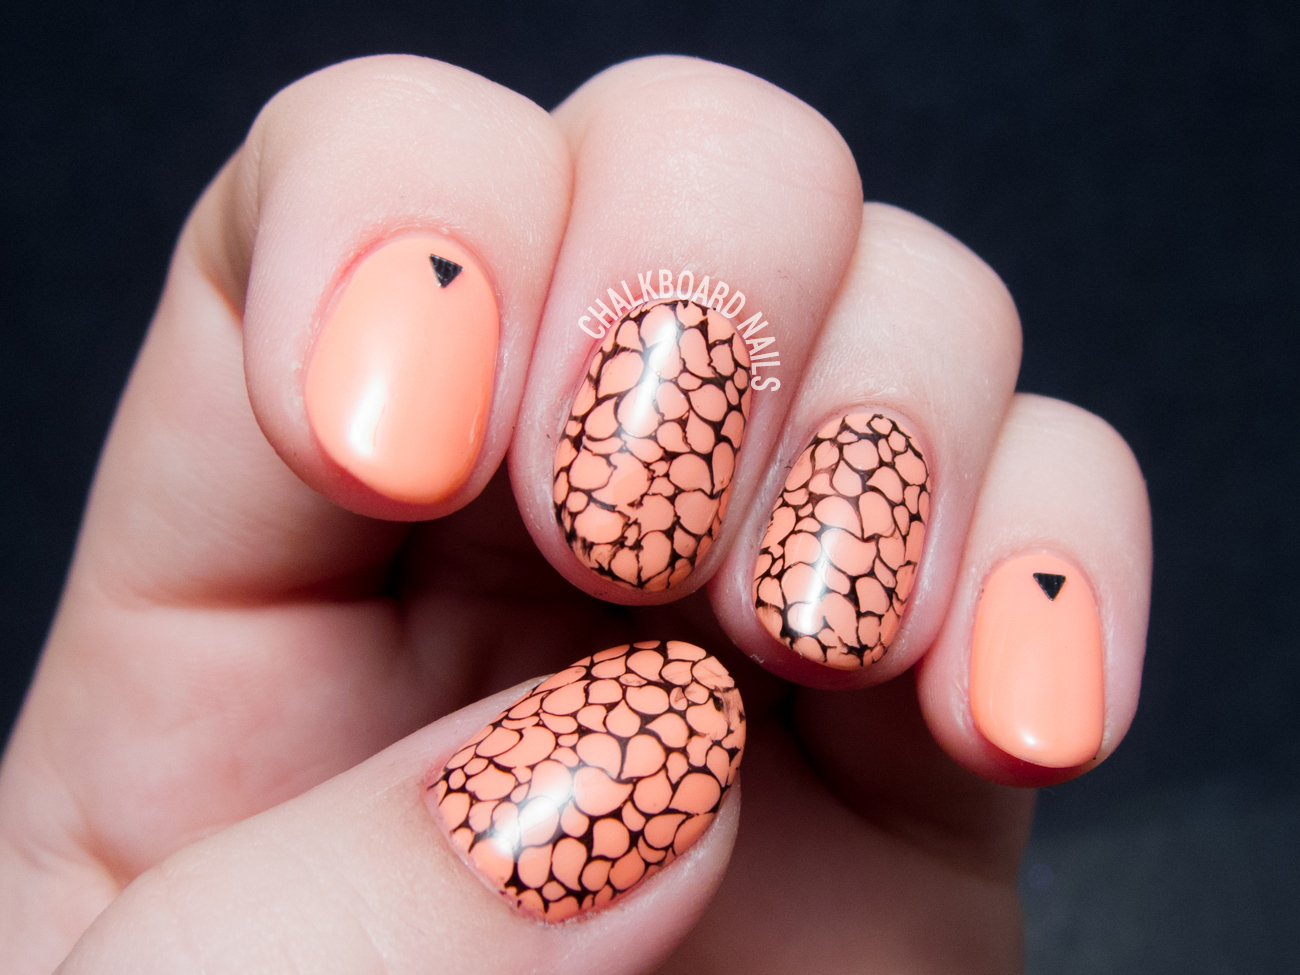 5. Nail Stamping Design Templates - wide 2